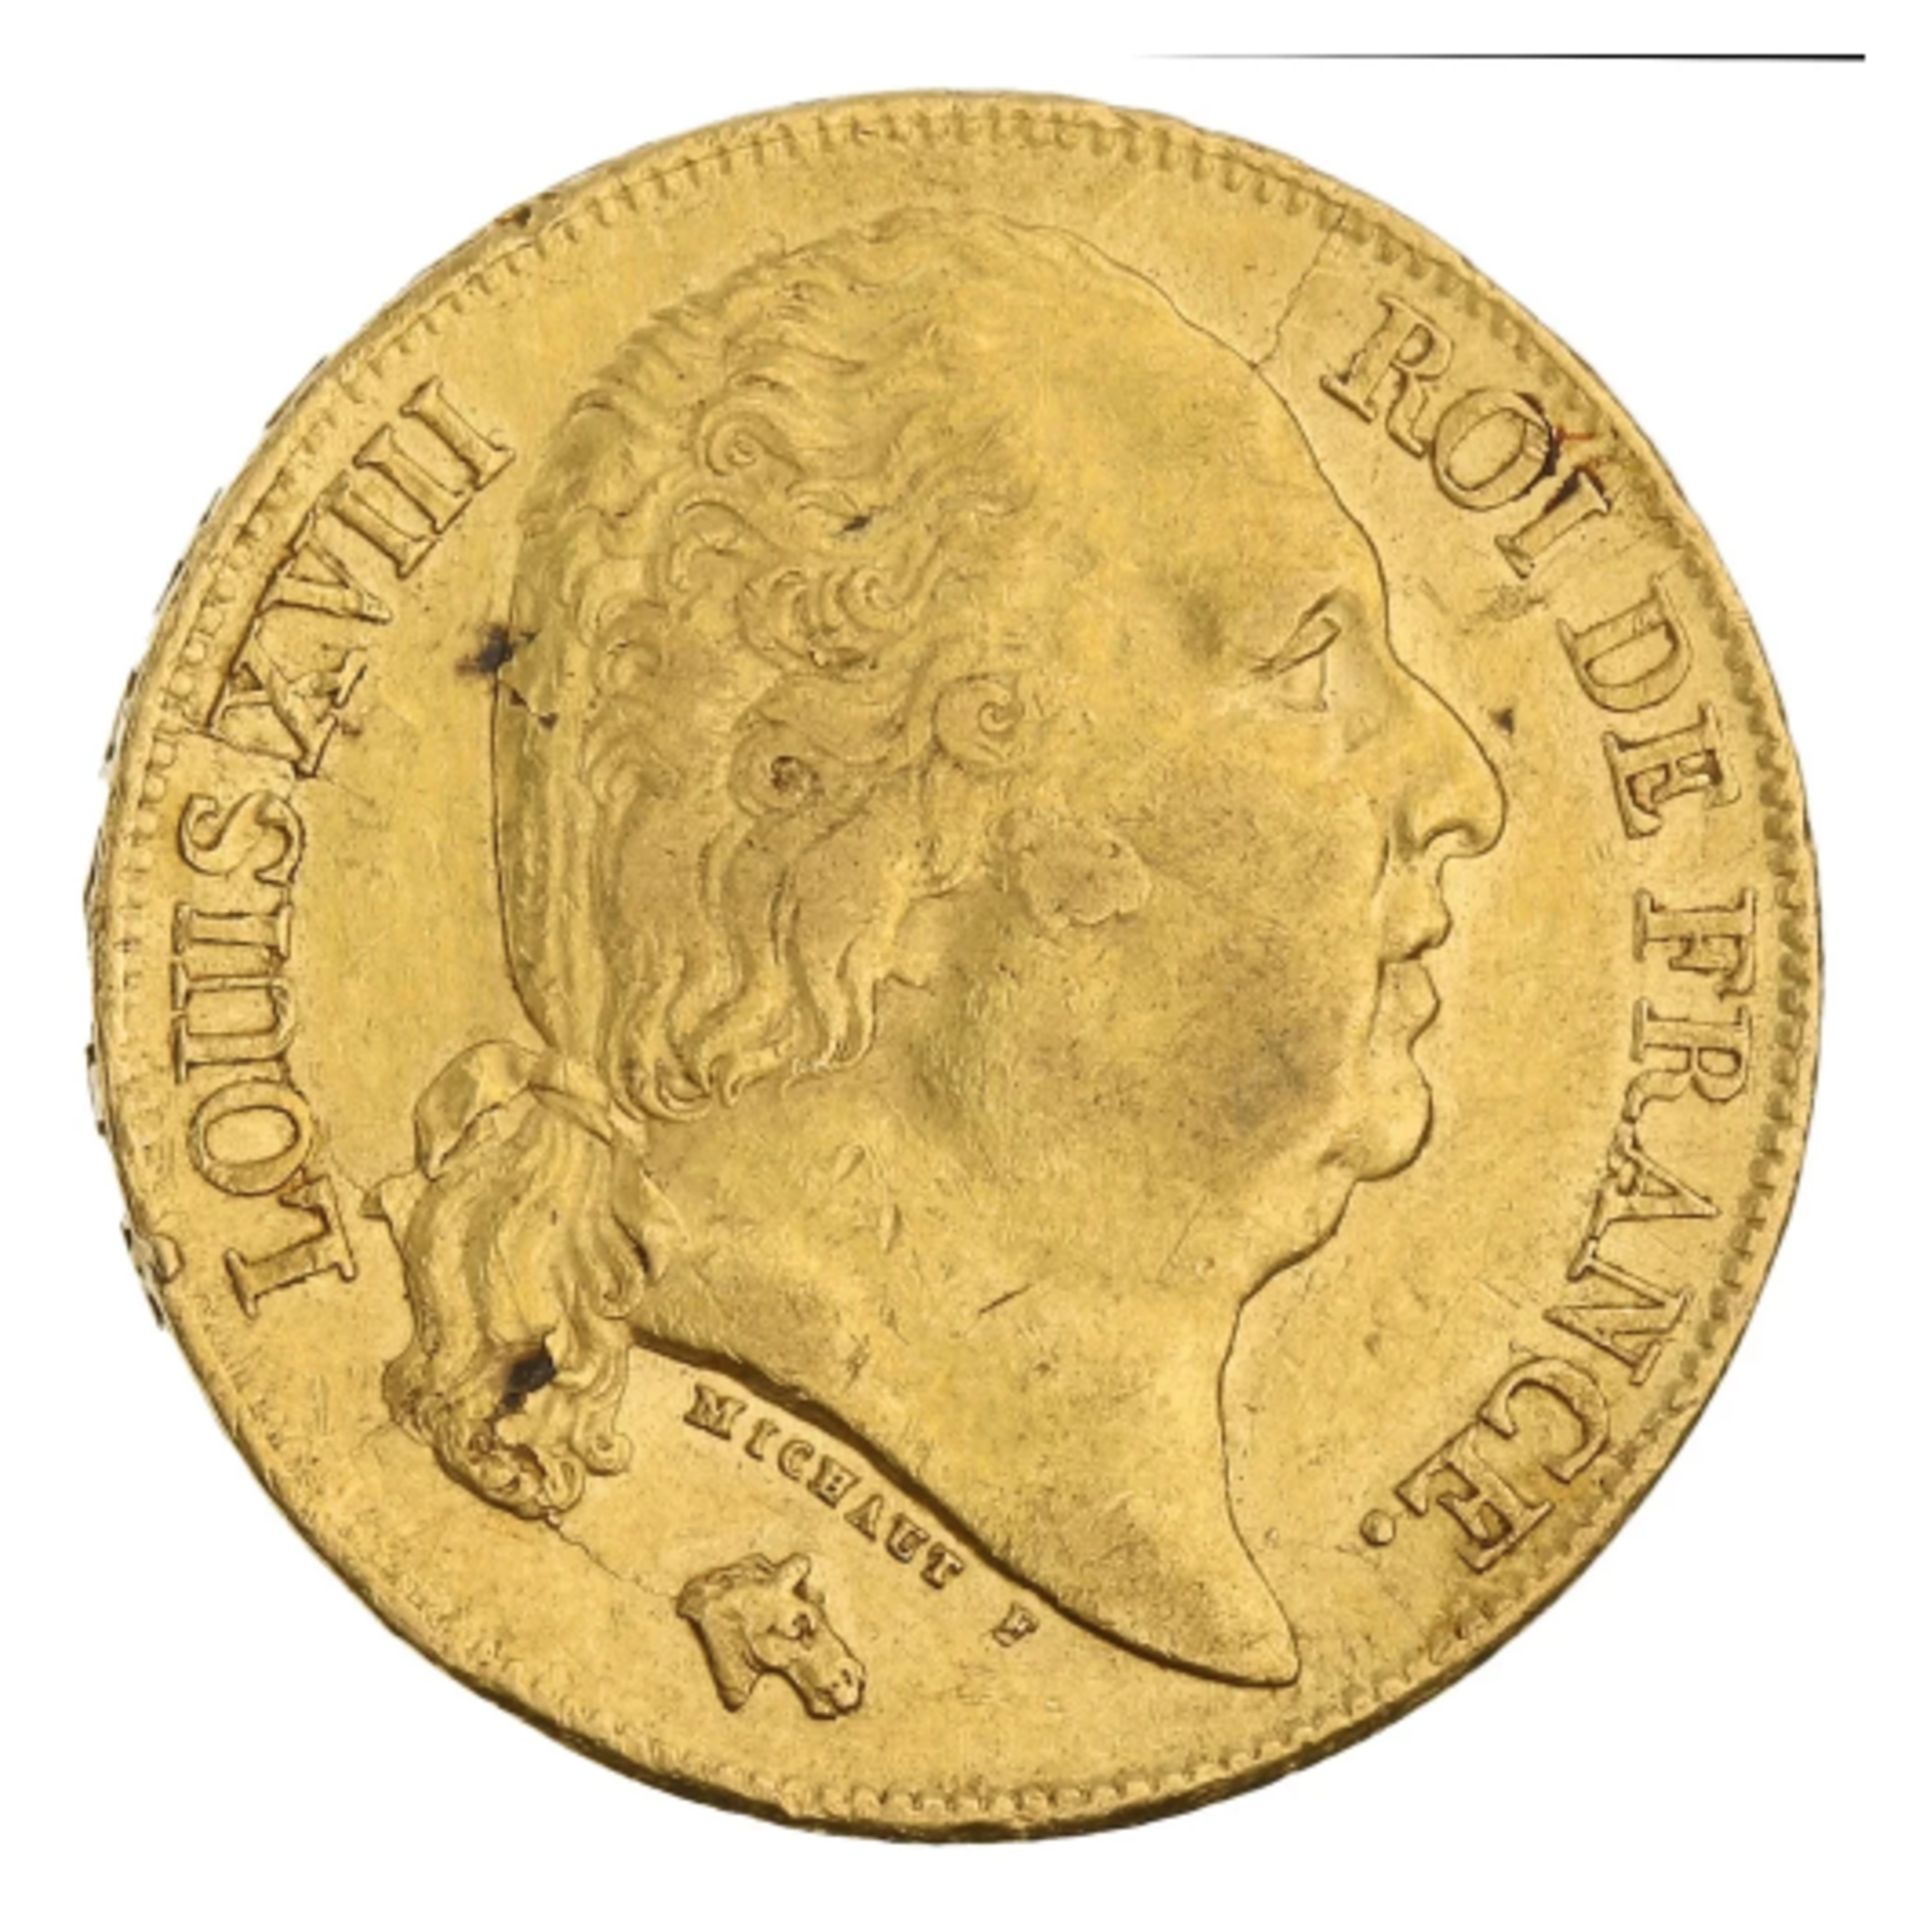 1818 - 20 Francs A - Louis XVIII - Bare head - Image 2 of 2